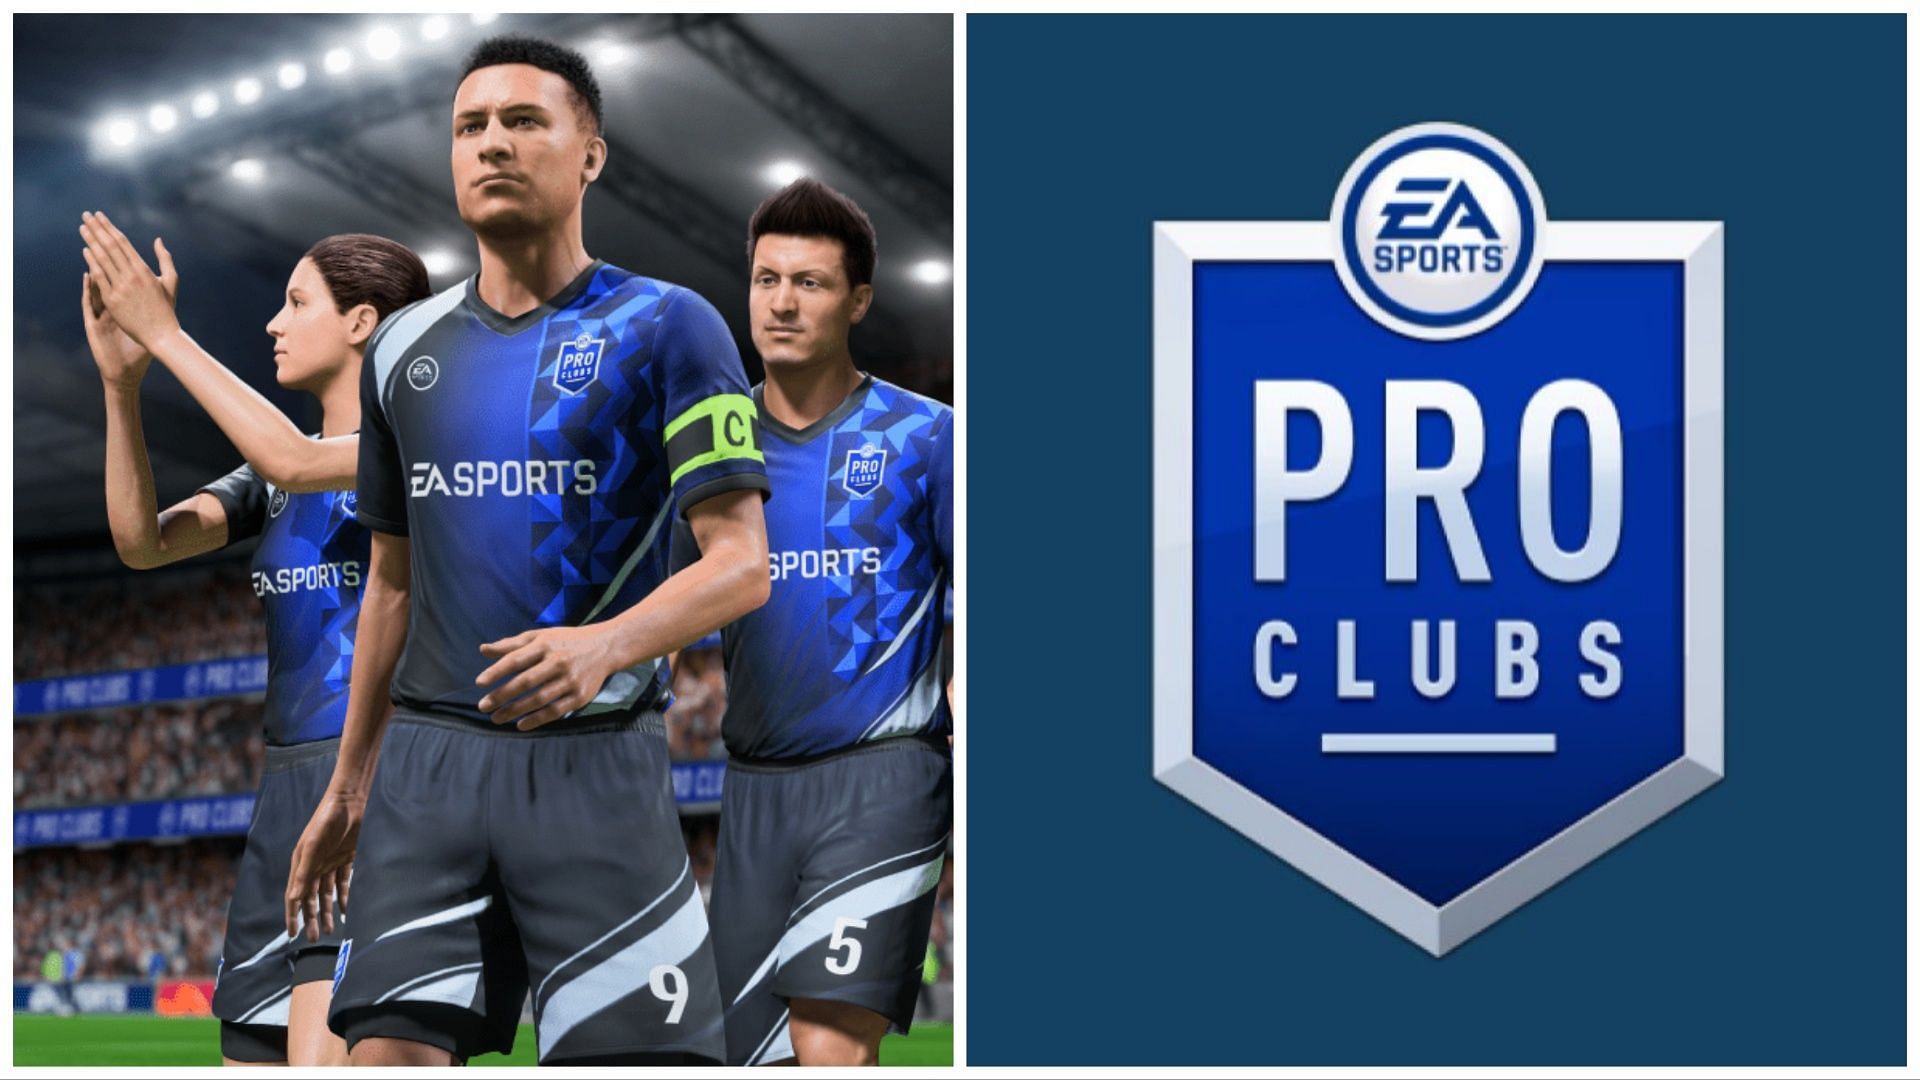 Pro Clubs is one of the most popular game modes in the FIFA series (Images via EA Sports)